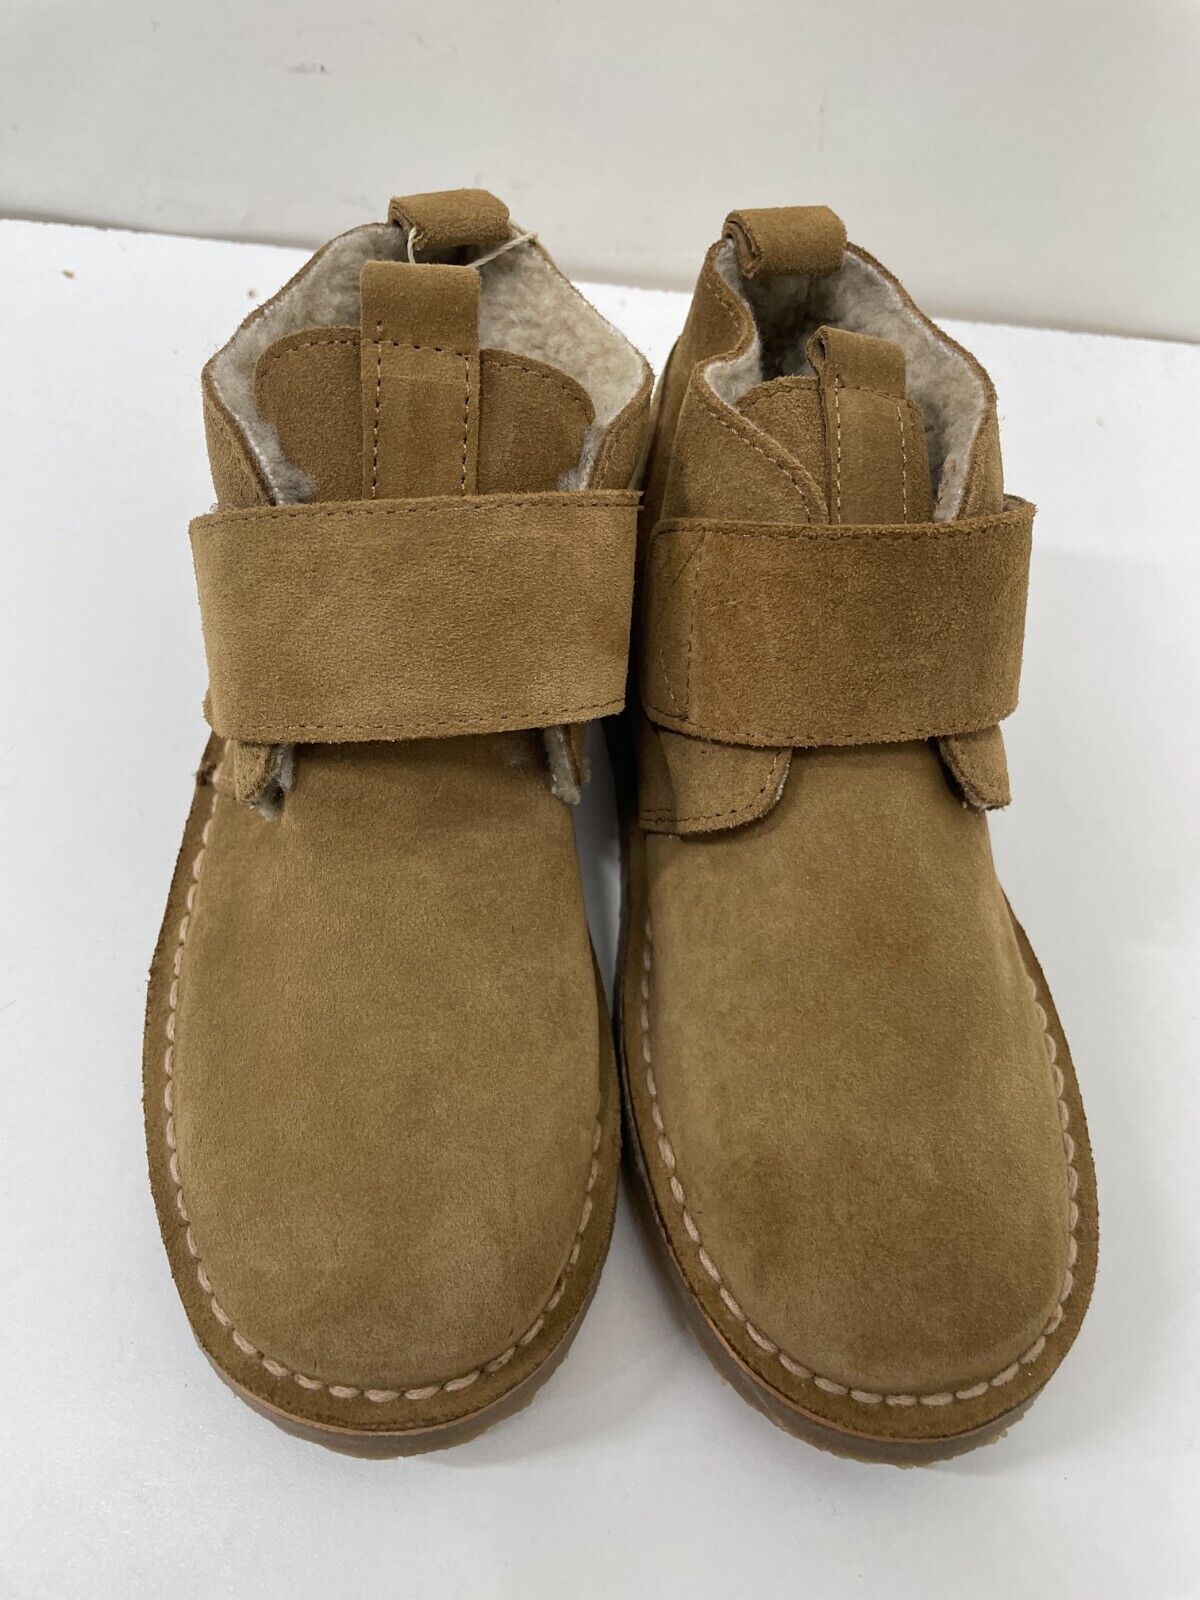 Zara Kids 13.5 Suede Leather Ankle Boots Taupe Hook & Loop Strap 4150/030/131